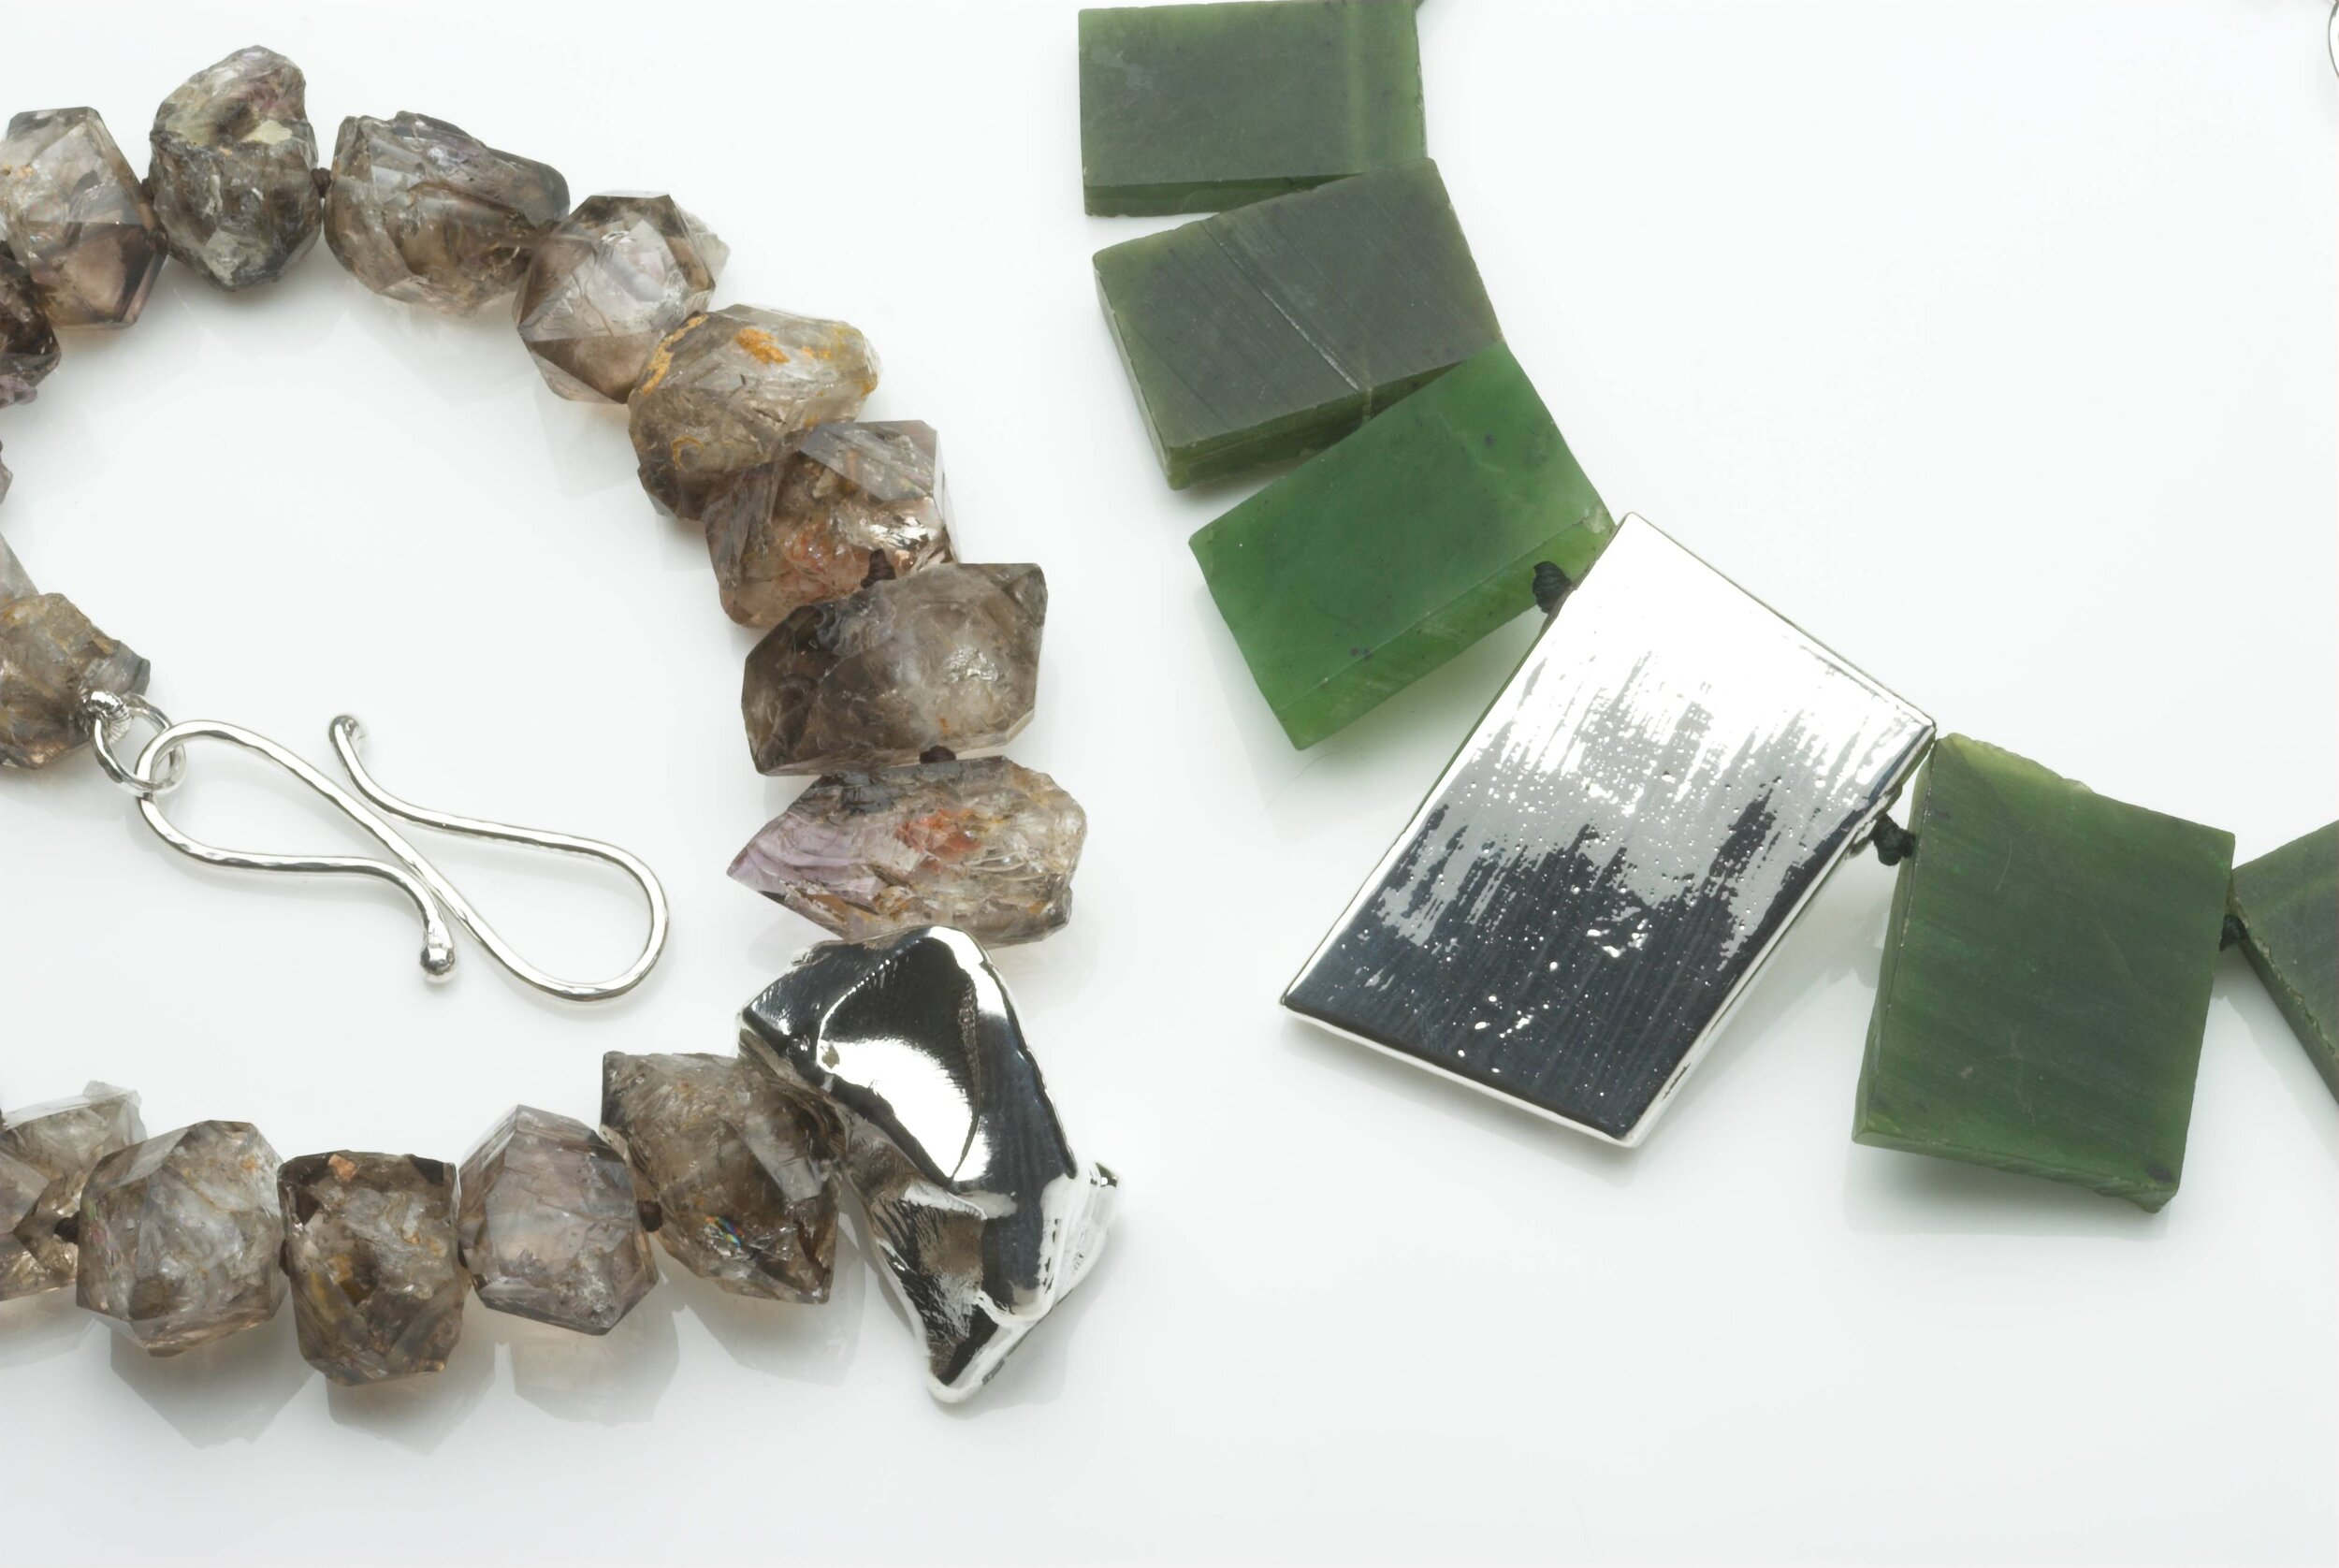 Rough cut Smokey quartz and smooth Canada Jade Necklaces with Silver Pendants ££590 and £740.jpg